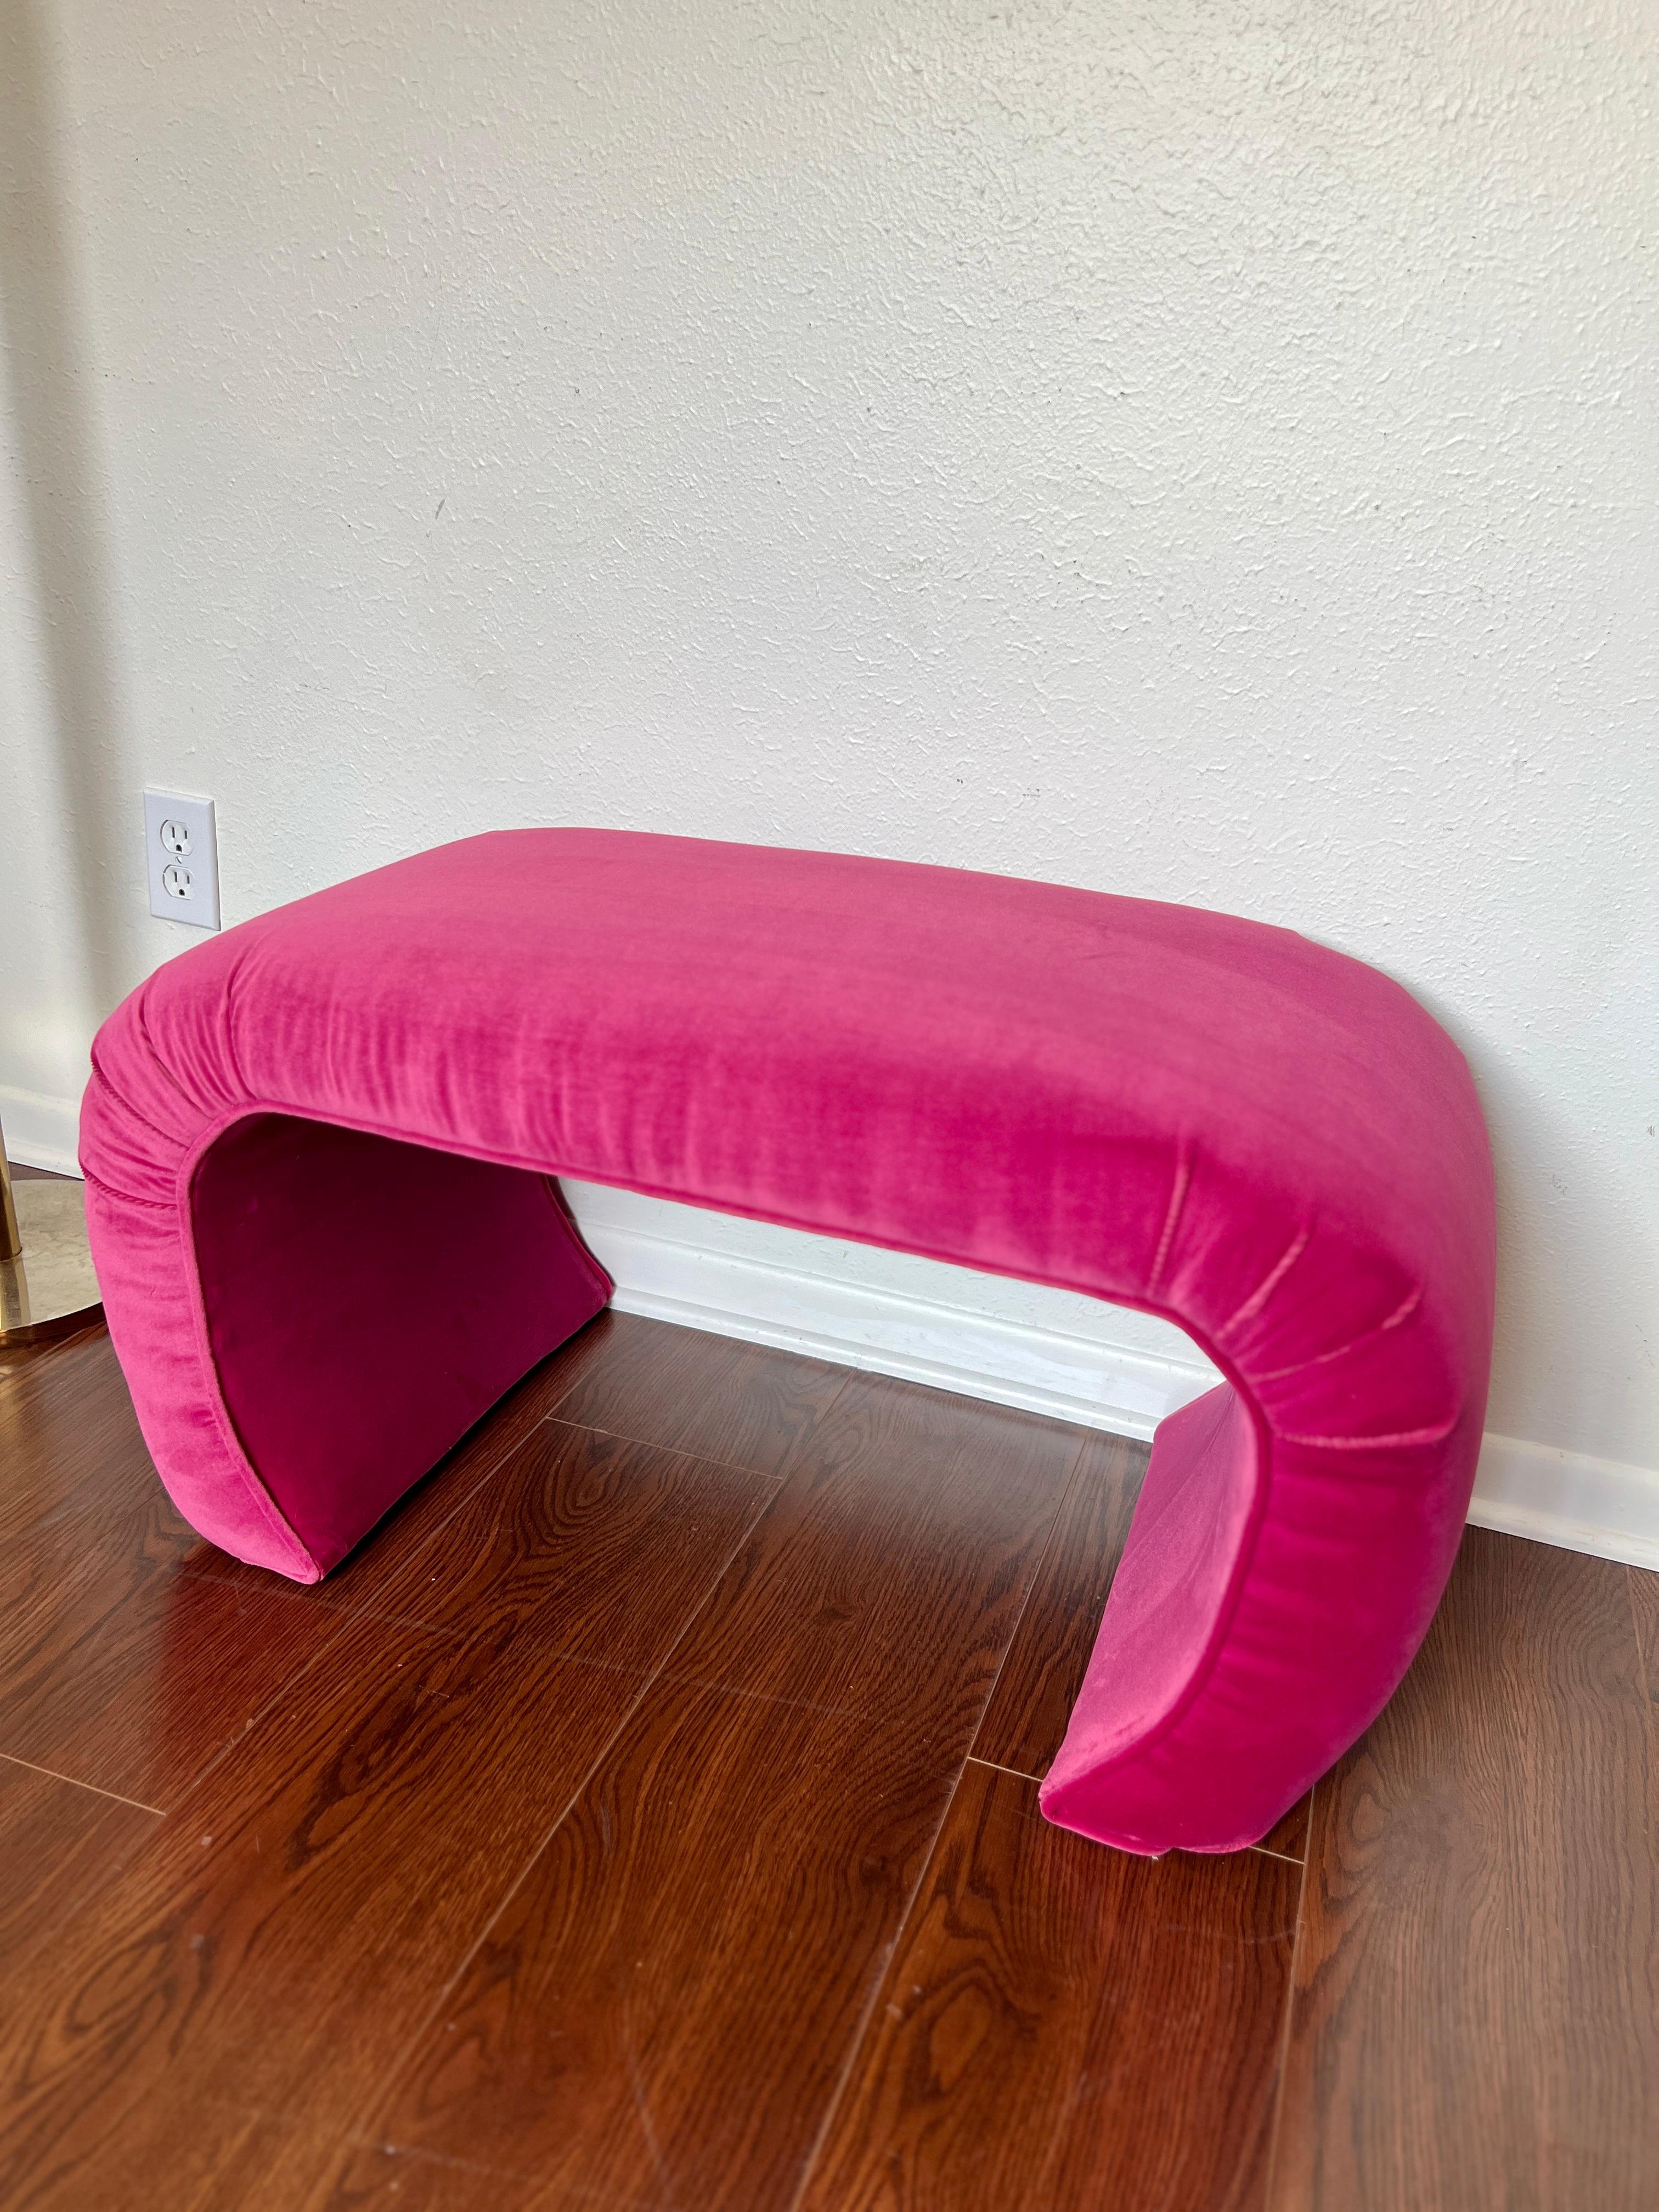 Late 20th Century A vintage waterfall ottoman reupholstered in a hot pink performance velvet